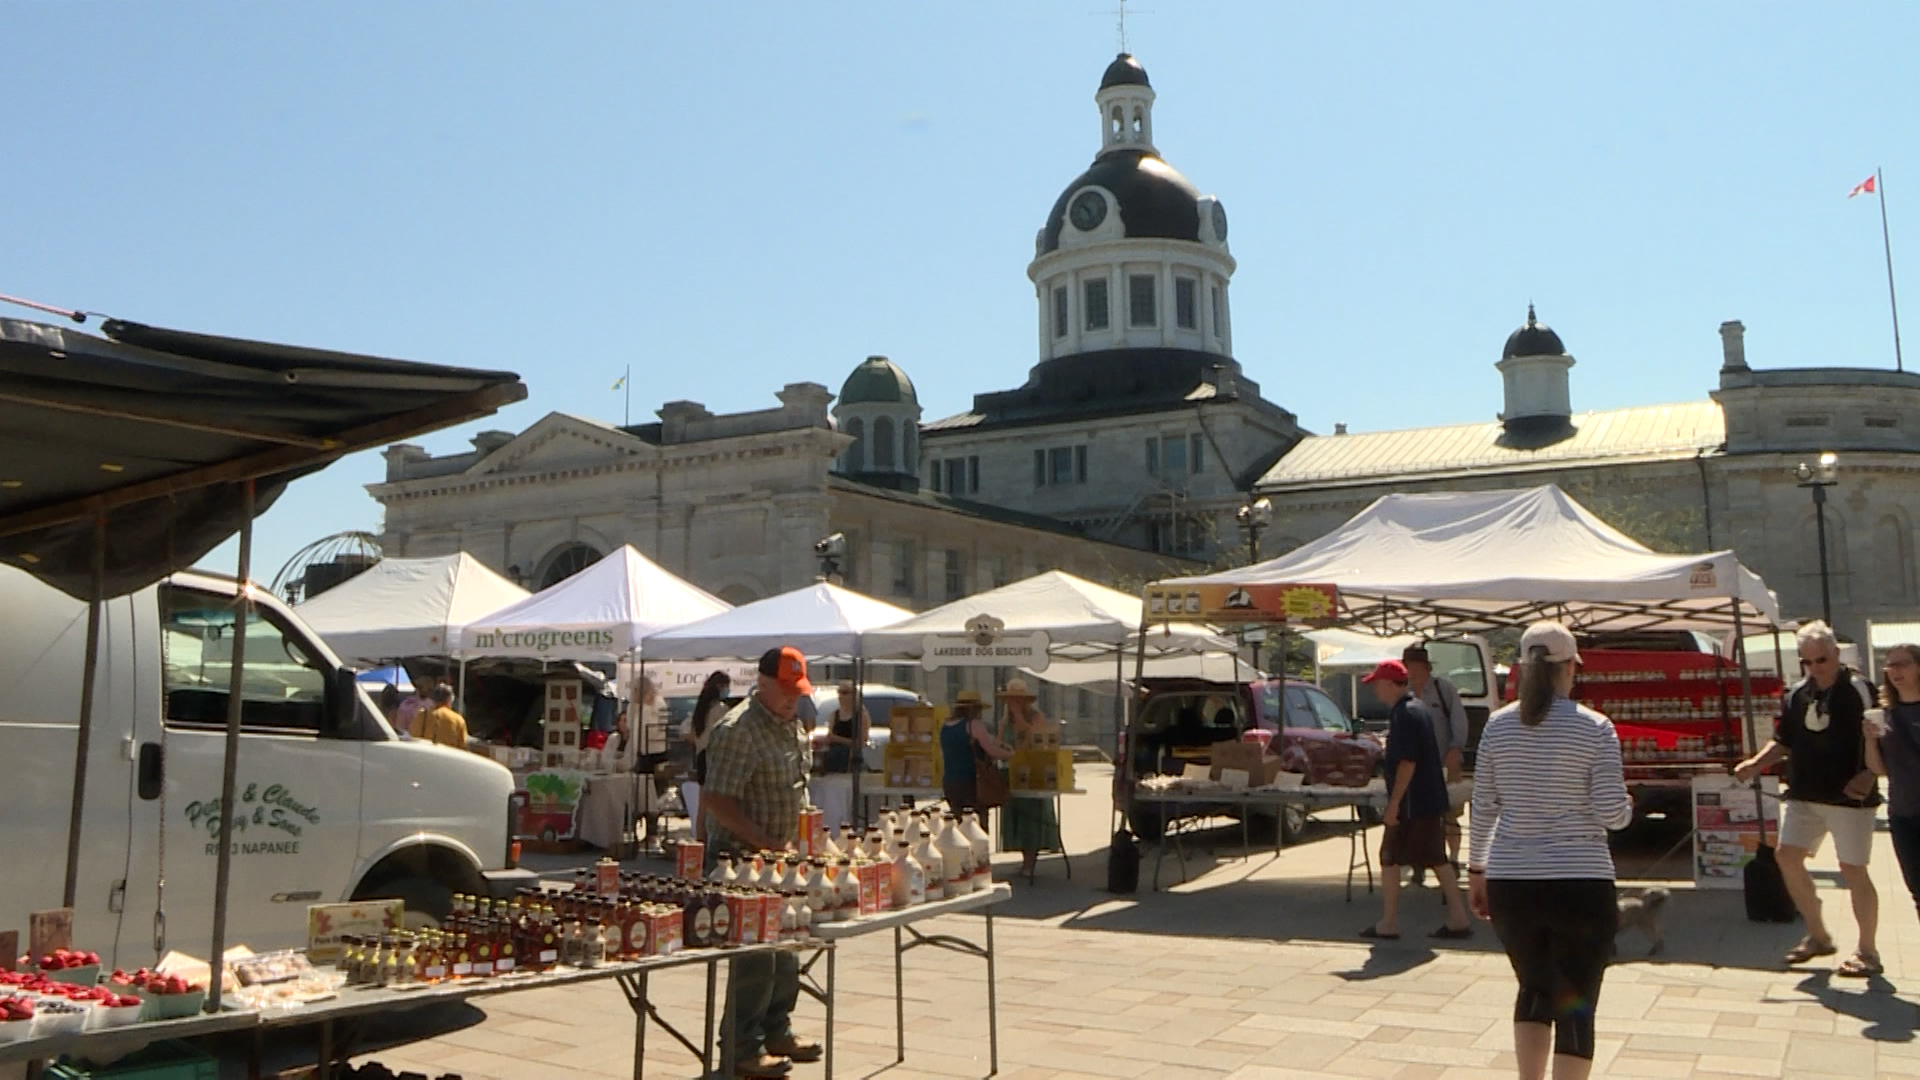 City of Kingston set to take over public market day-to-day operations